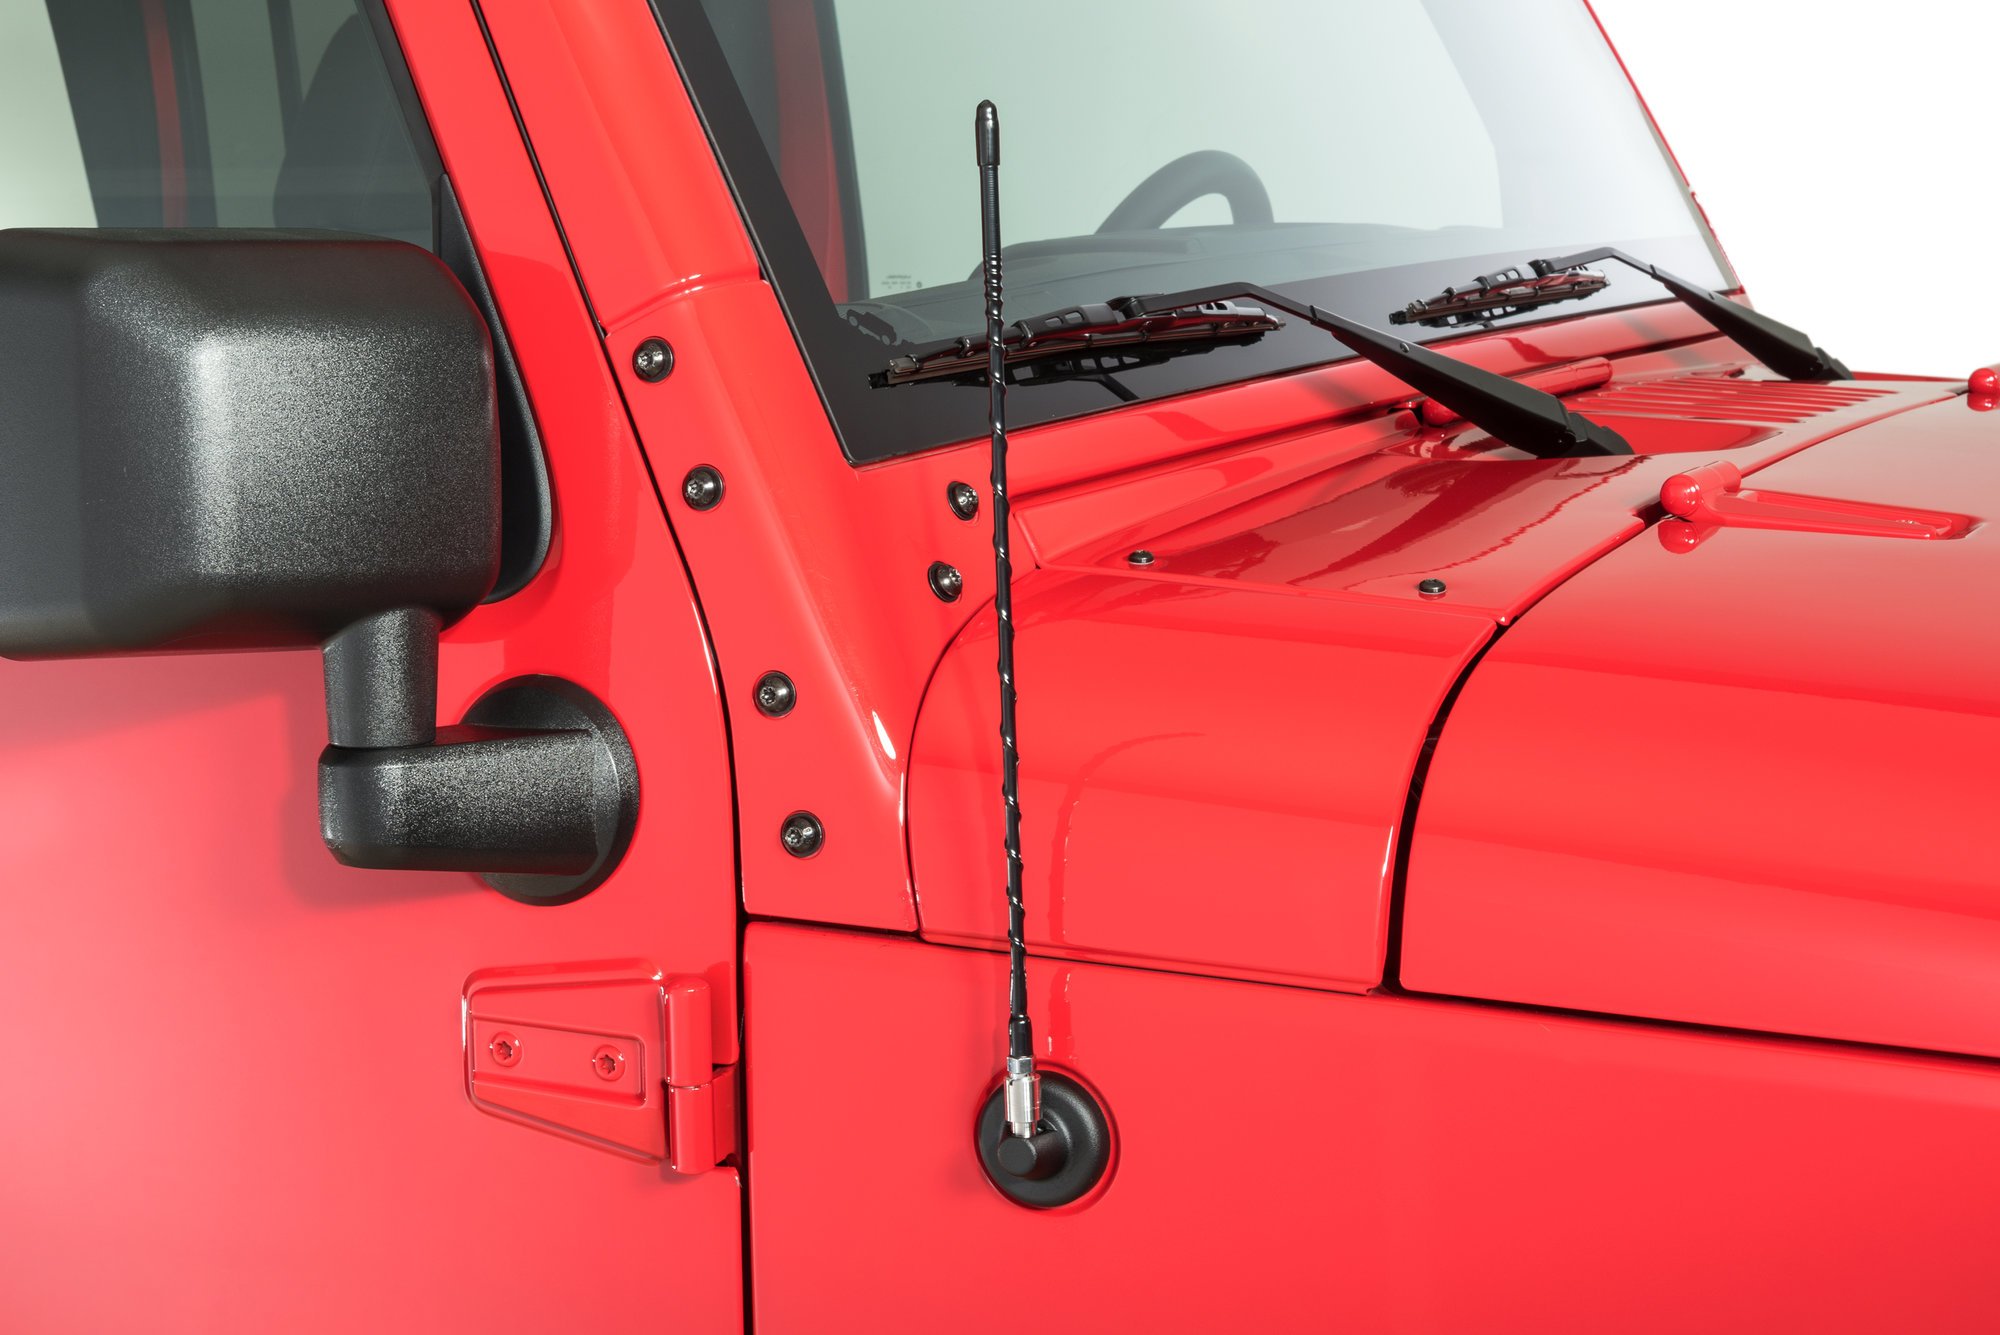 Tradesman K Antenna Compatible with Off-Road Jeep Wrangler JK JKU JL JLU Gladiator JT（2007-2020） Unlimited FM/AM Reception Radio Accessories Flexible Rubber 13 Inch Replacement Adapter